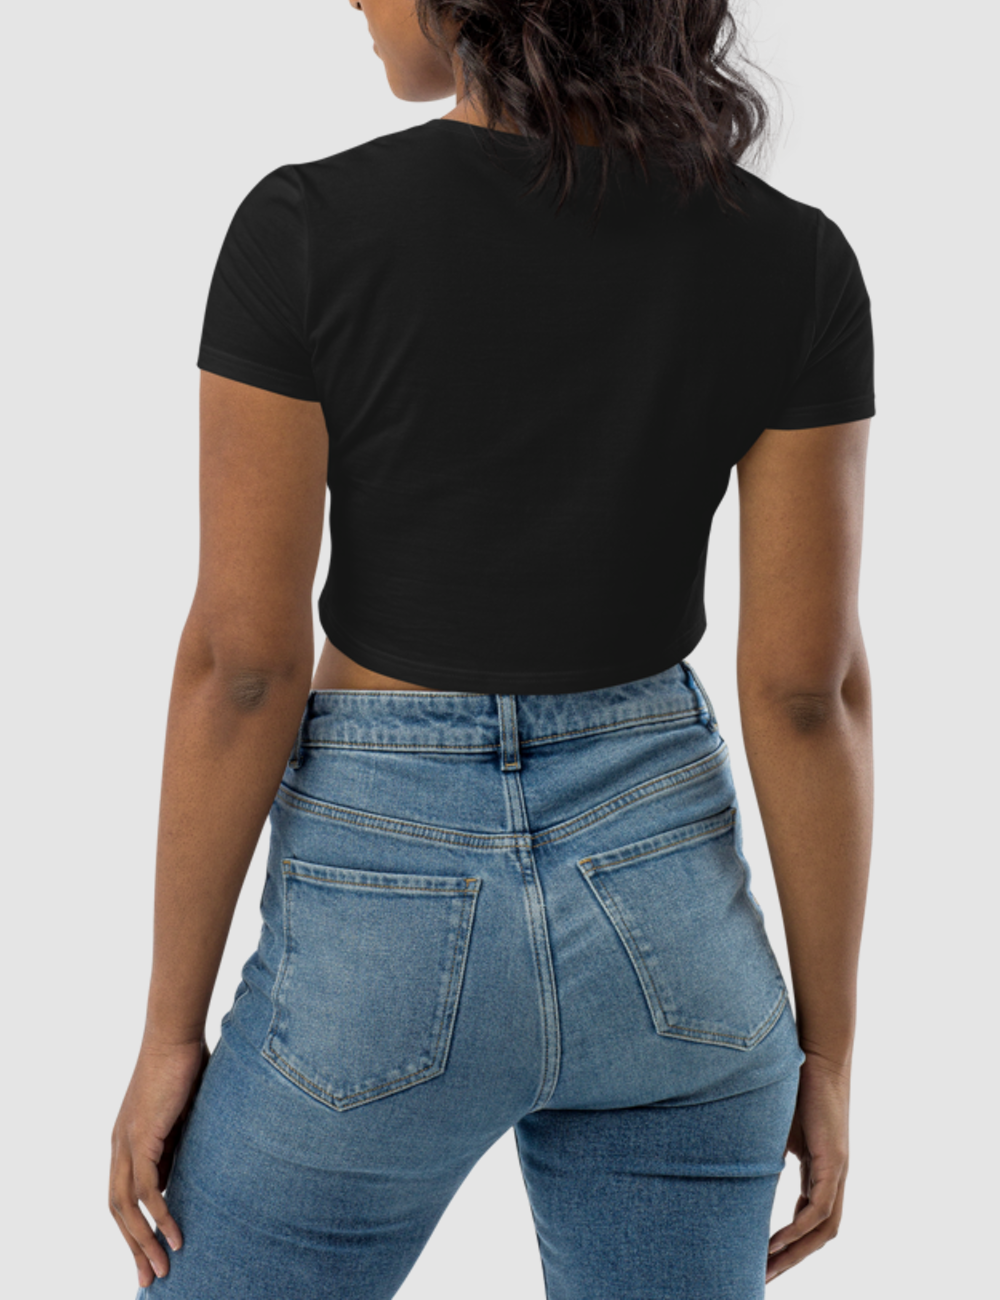 Style Women's Fitted Crop Top T-Shirt OniTakai